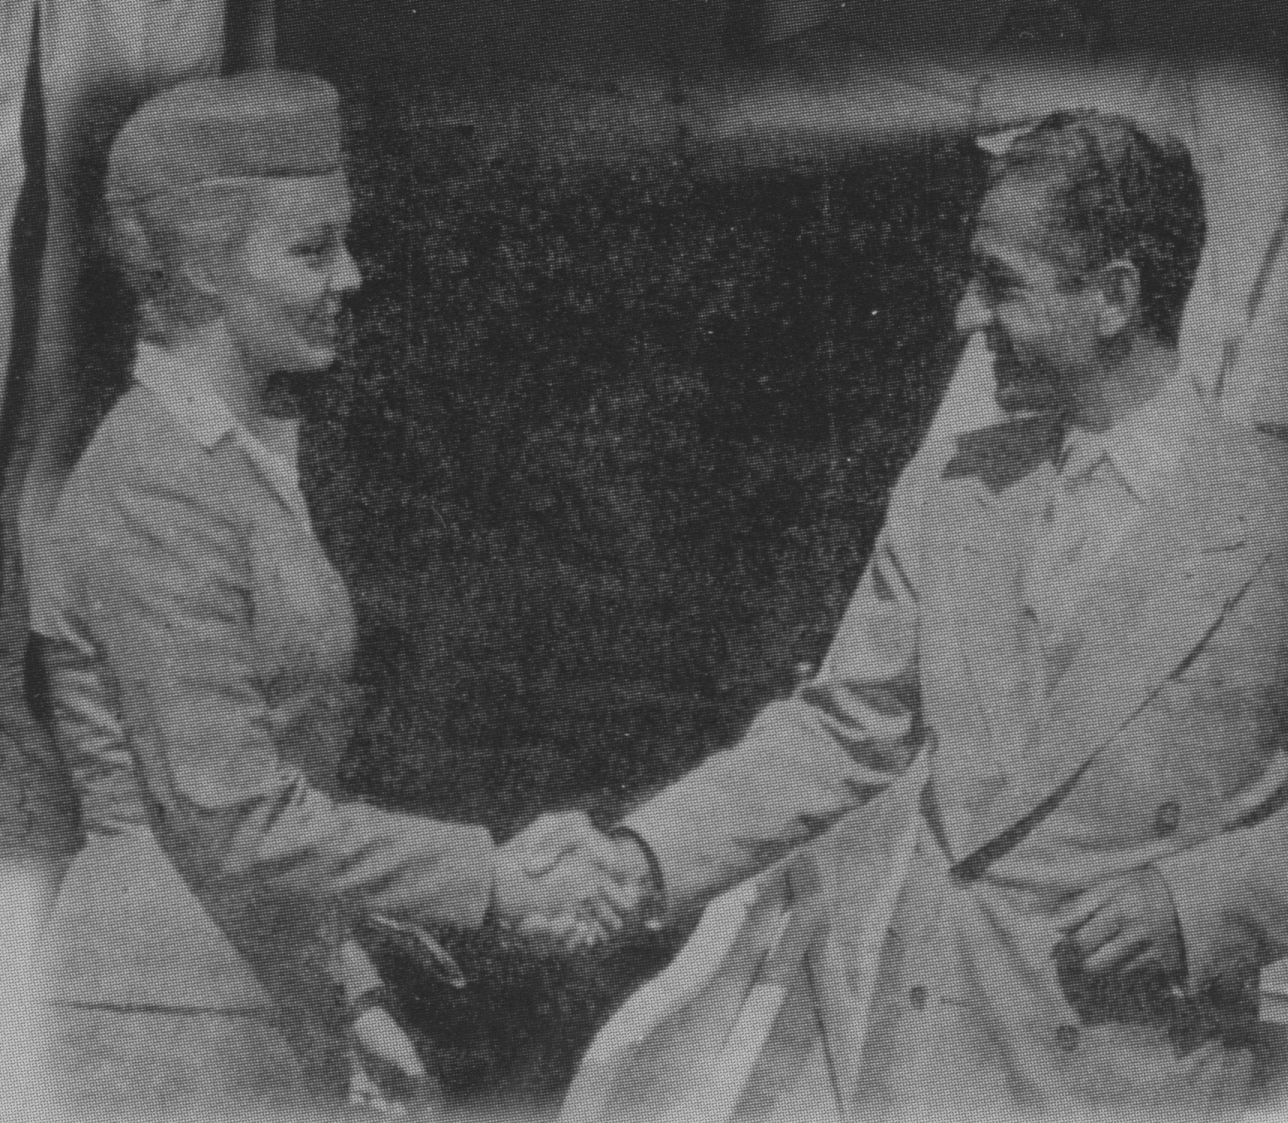 1958 Upon arrival in San Francisco from Honolulu Pan Am stewardess Ellen Forseth bids farewell to the last Shah of Iran.